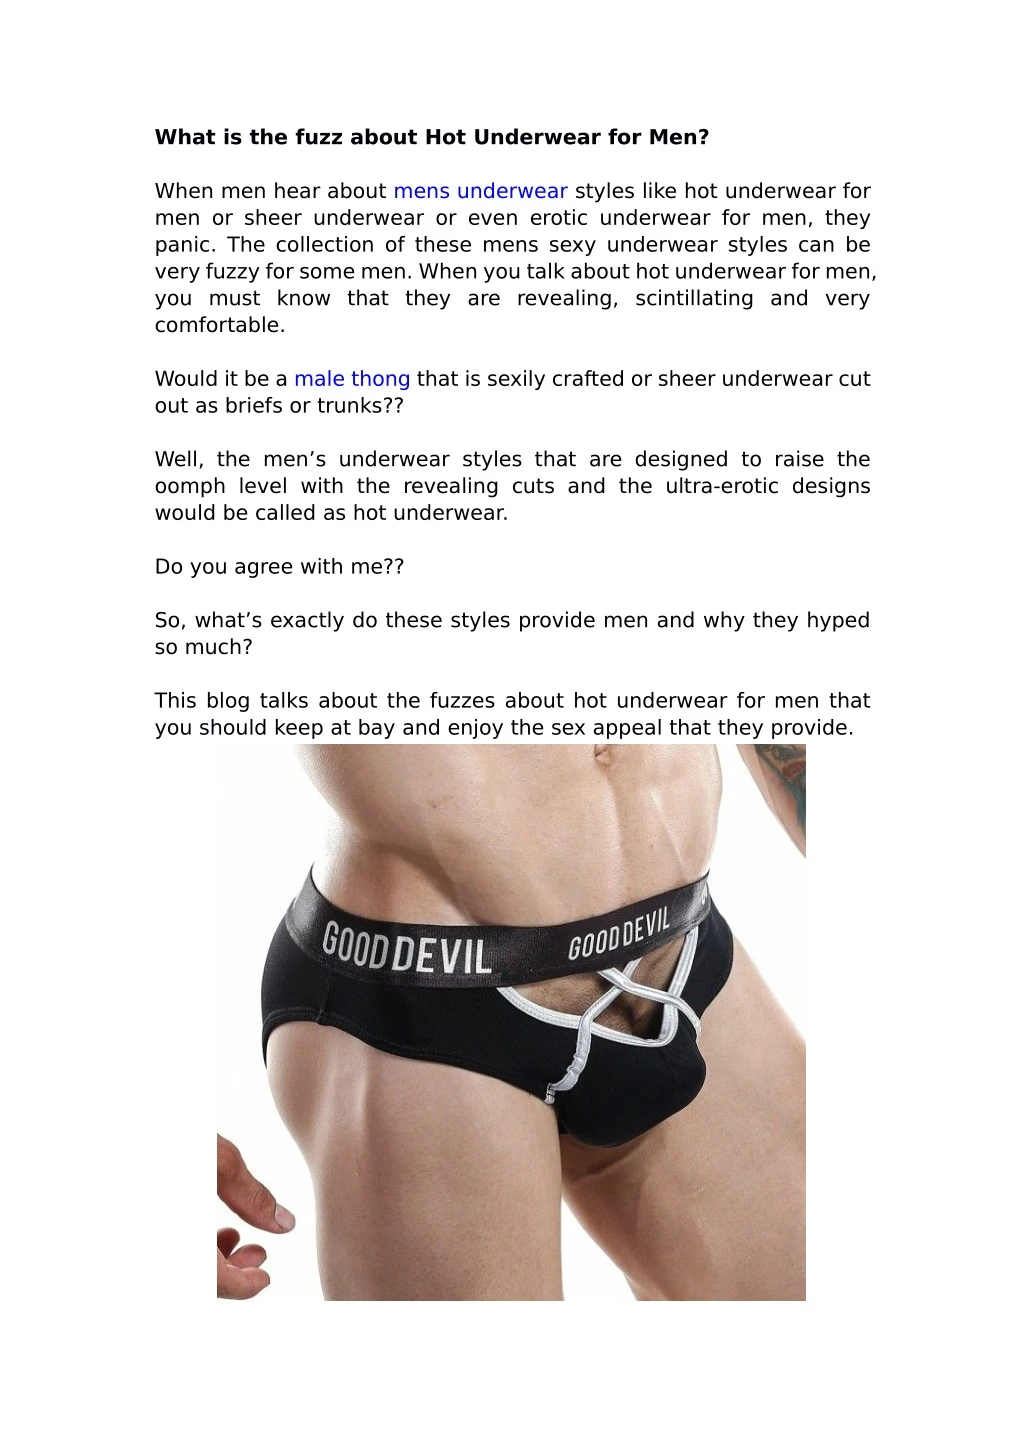 what is the fuzz about hot underwear for men